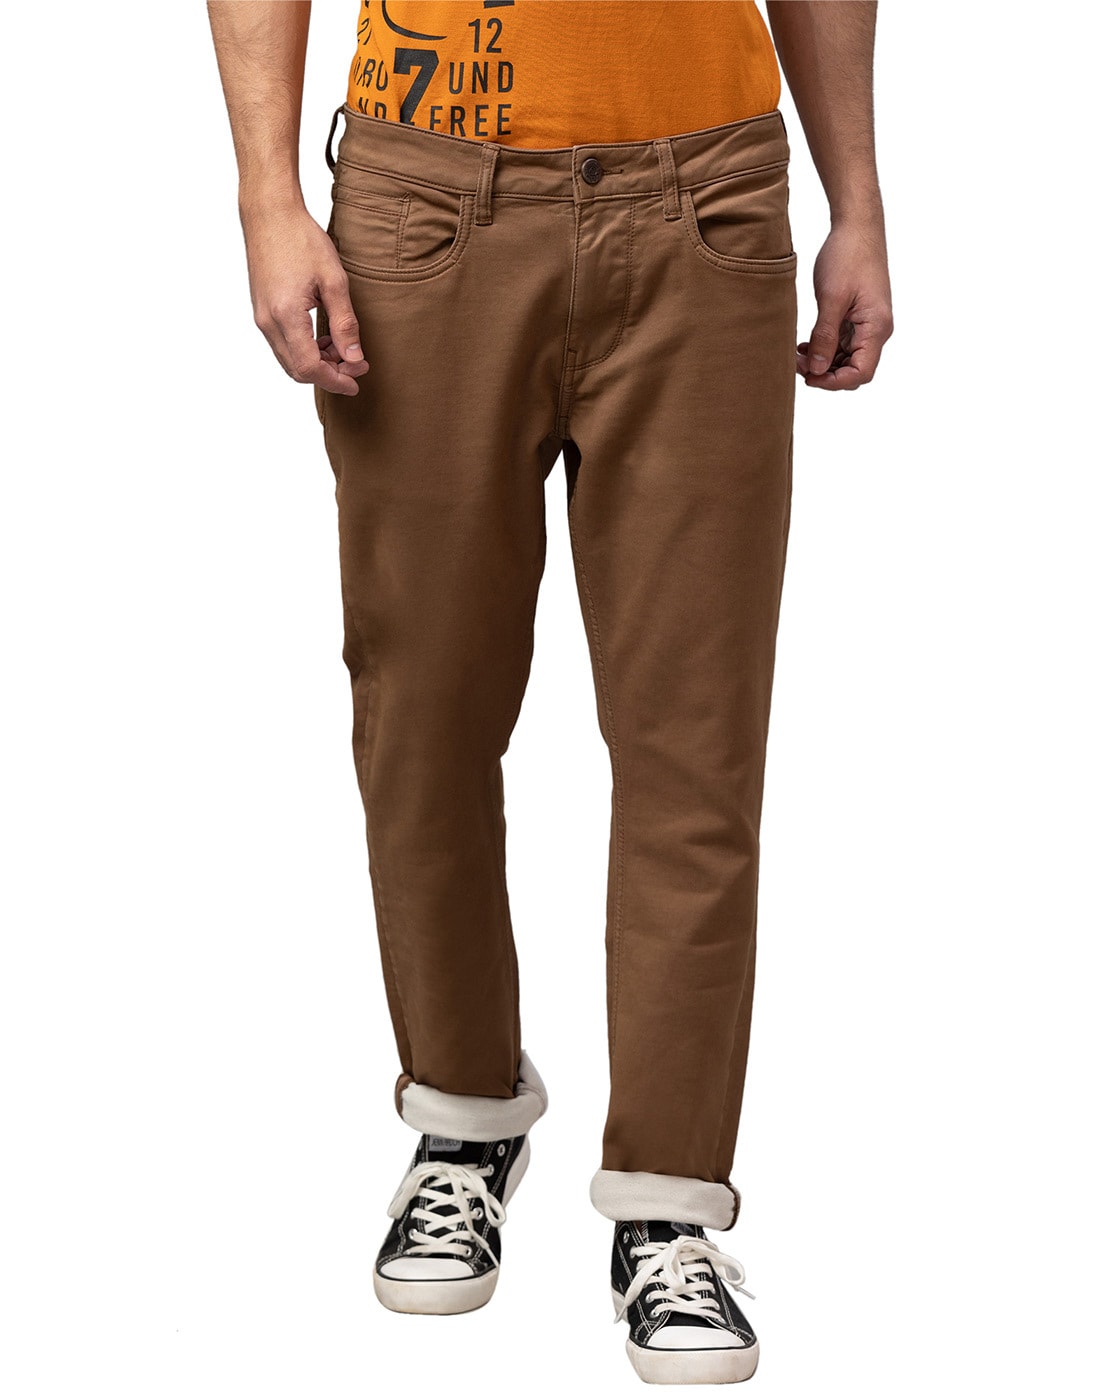 It's Time to Bring Back Cargo Pants | WIRED